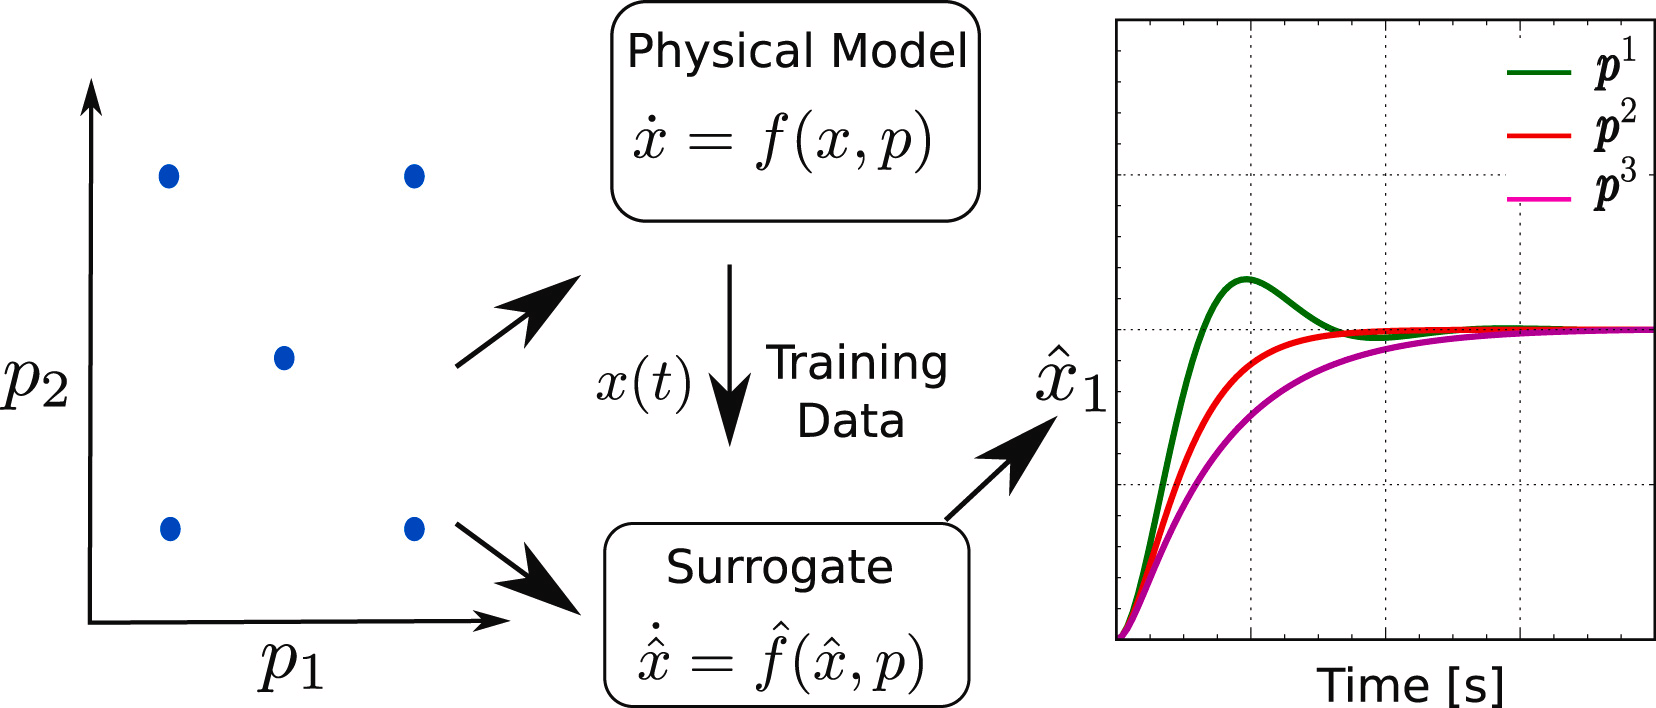 Trained surrogate models can replace computationally expensive physics-based models to accelerate computer simulations 